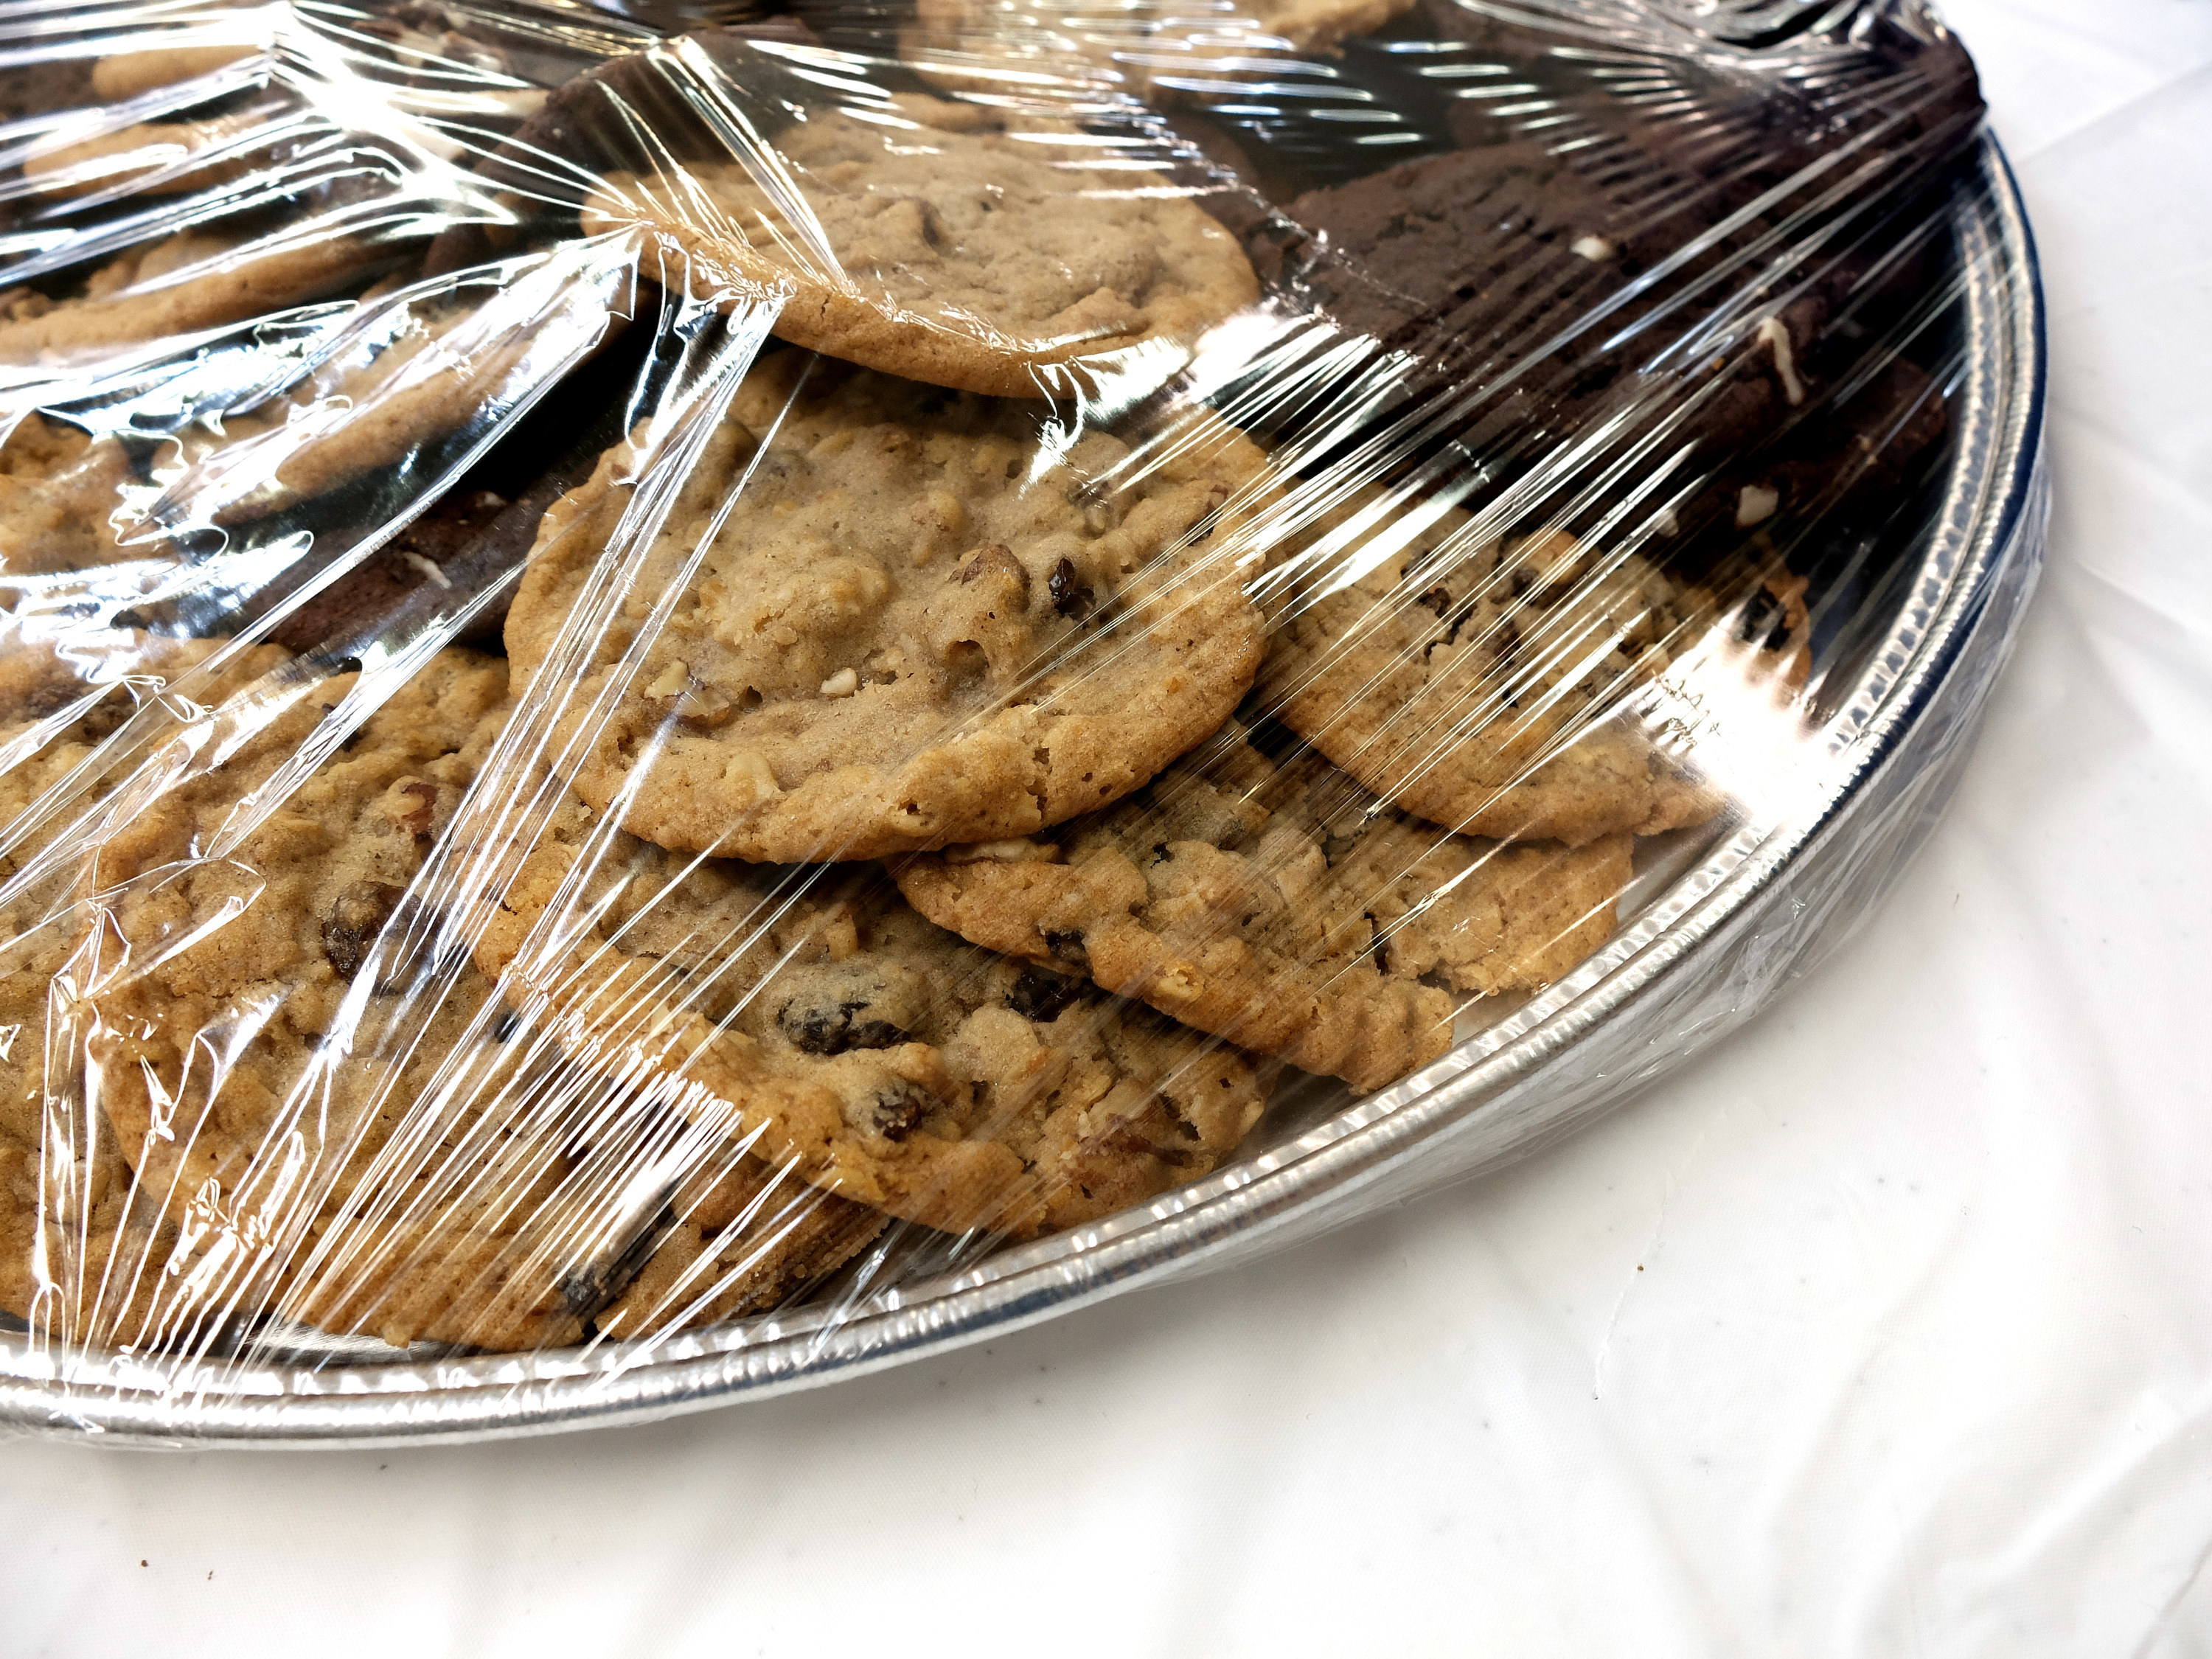 Plastic wrap on a plate of cookies